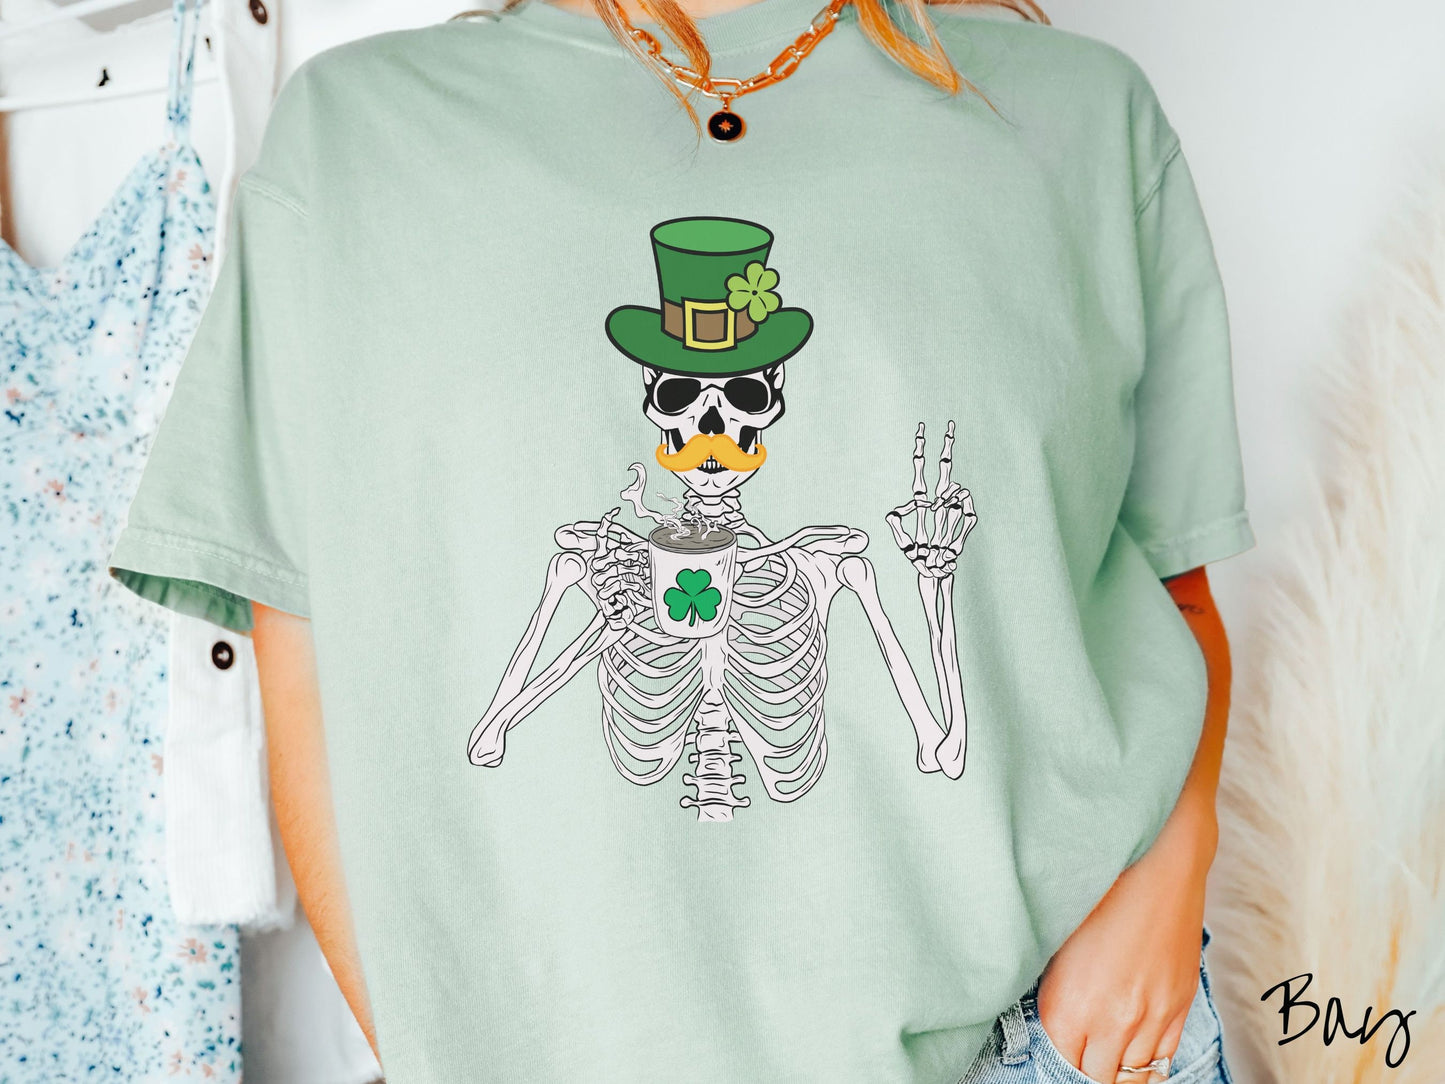 A woman wearing a vintage, bay colored shirt with a skeleton wearing a green top hat with a green clover and an orange mustache showing the peace sign with its left hand and drinking out of a steaming hot coffee cup with a three leaf clover on it.